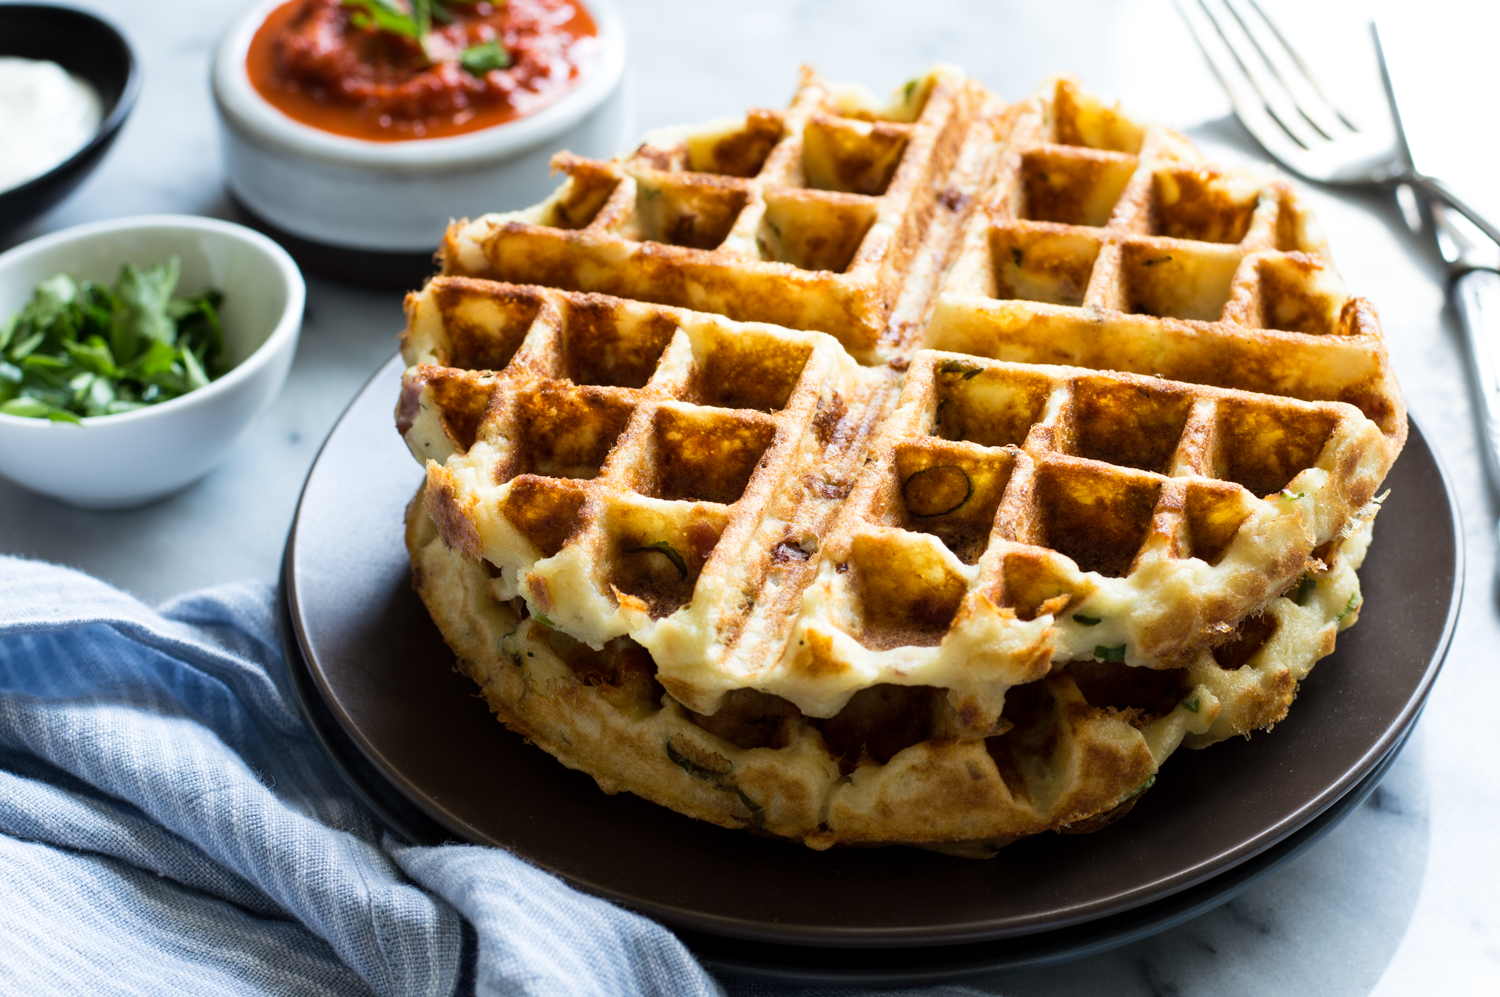 Ham & Cheddar Mashed Potato Waffles with Roasted Red Pepper Sauce